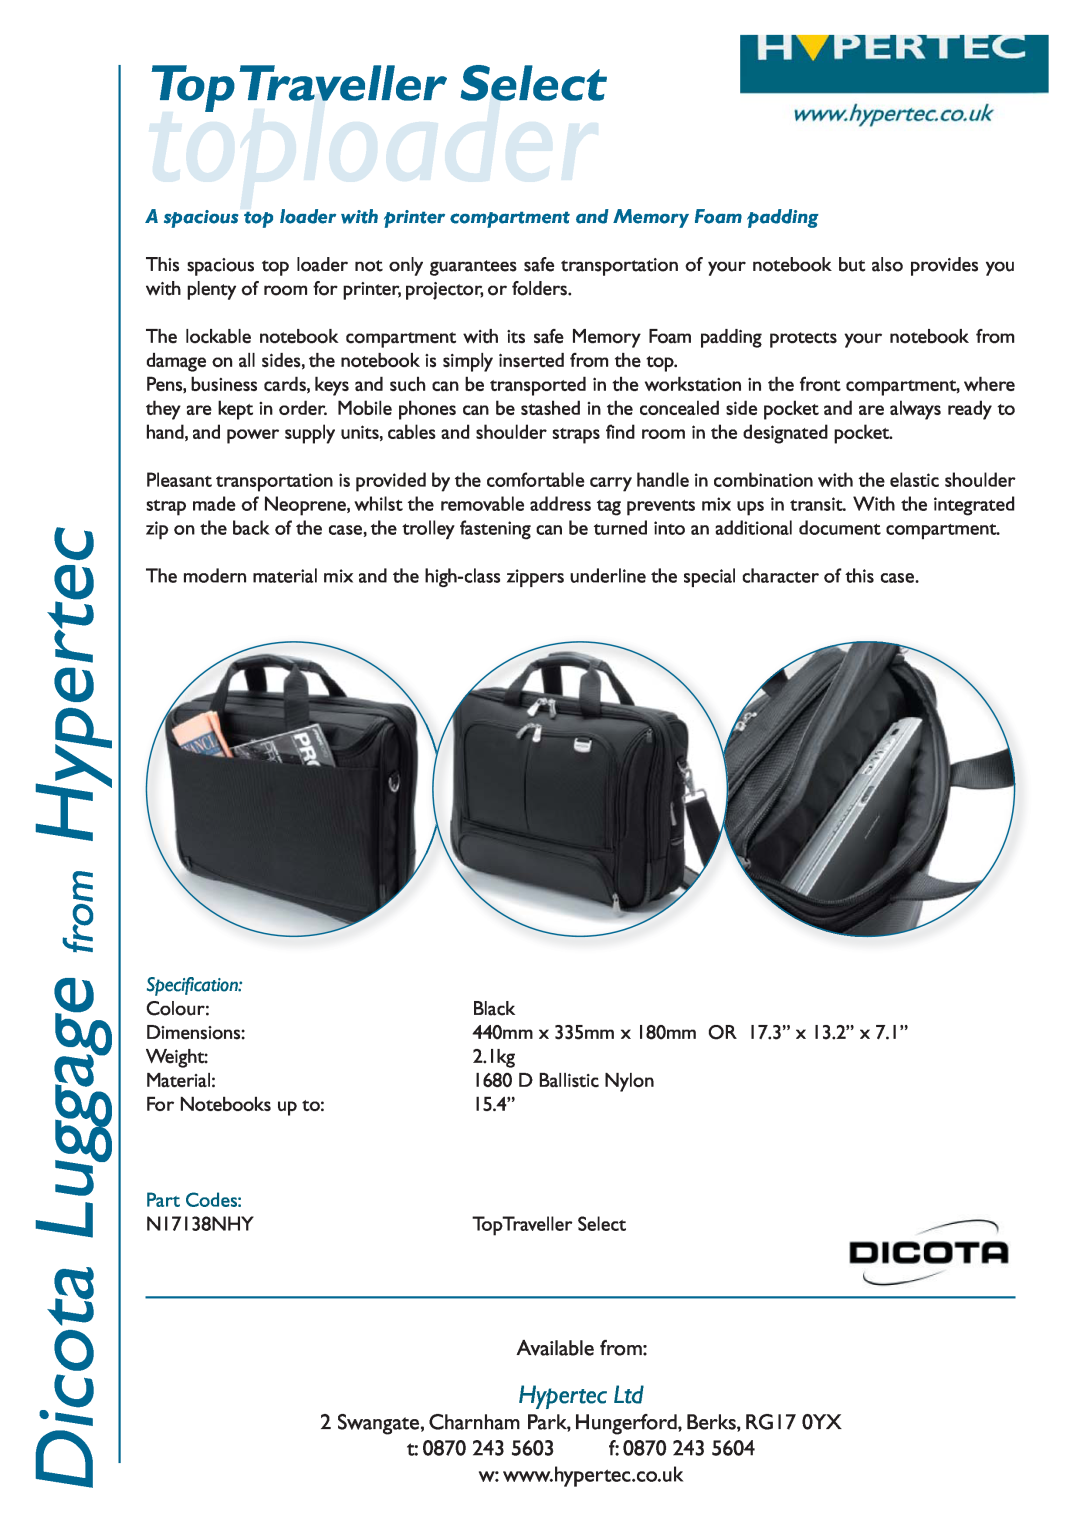 Hypertec N17138NHY dimensions toploader, Dicota Luggage from Hypertec, TopTraveller Select, Available from, t 0870 